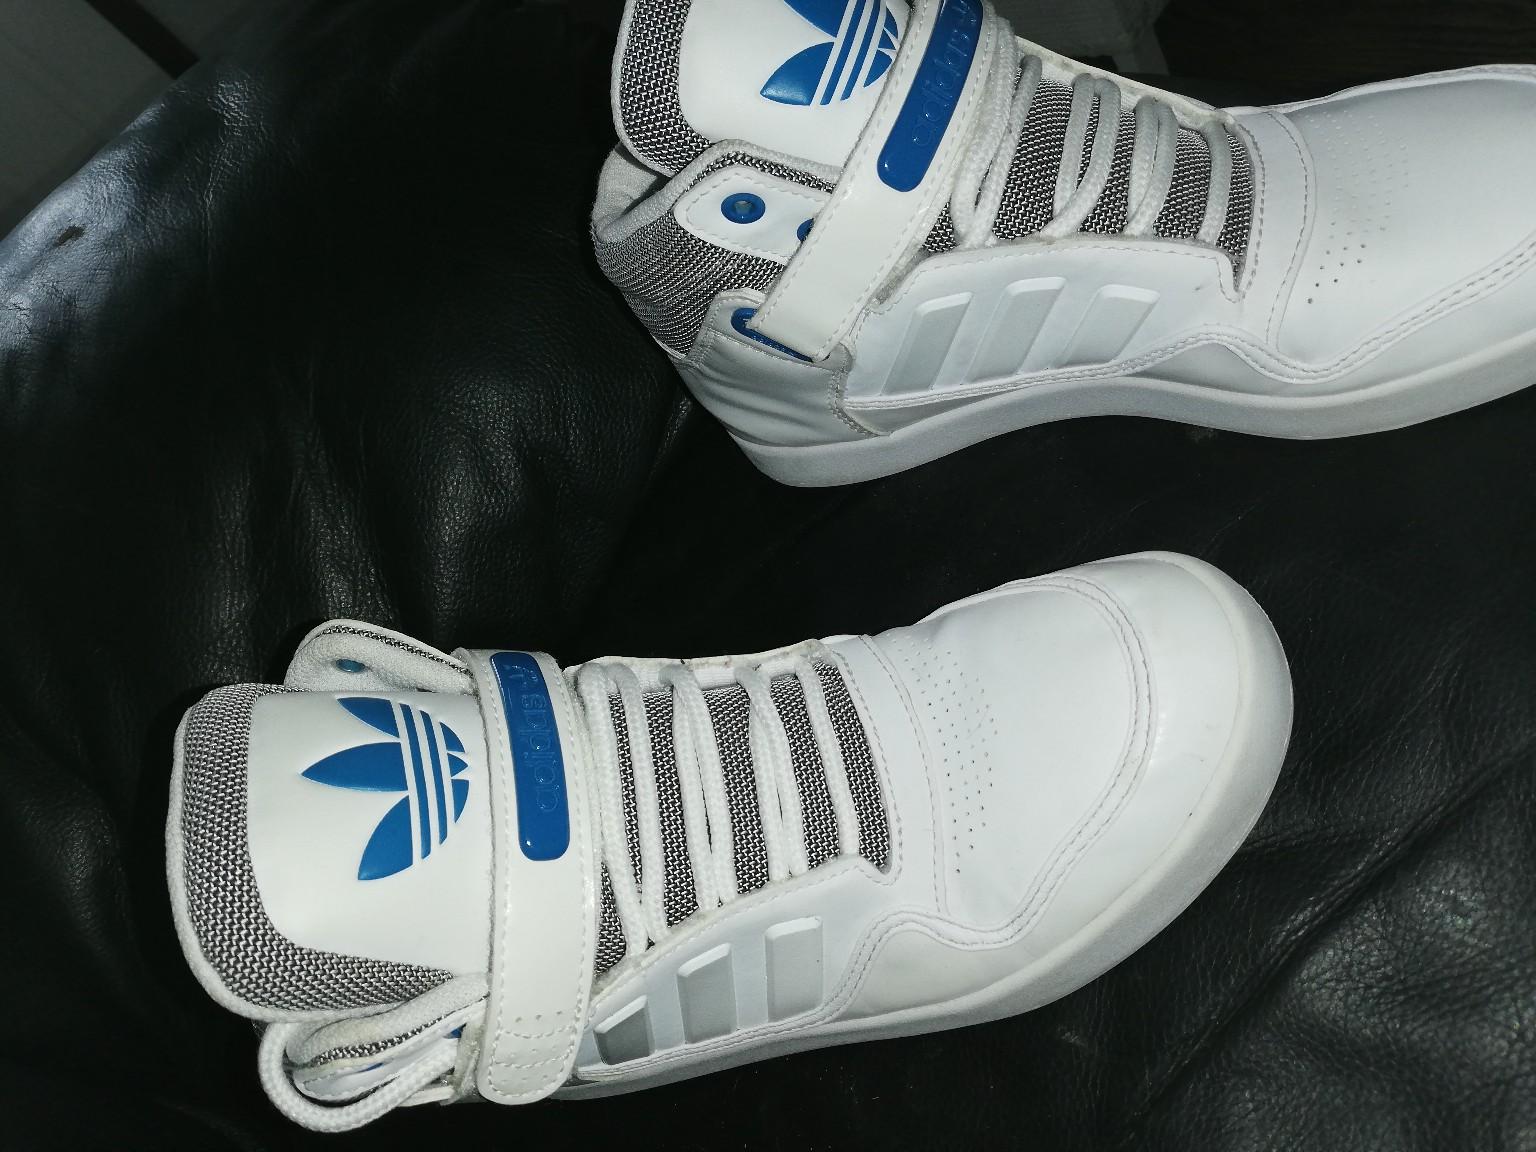 retro Adidas high tops like new in BT47 